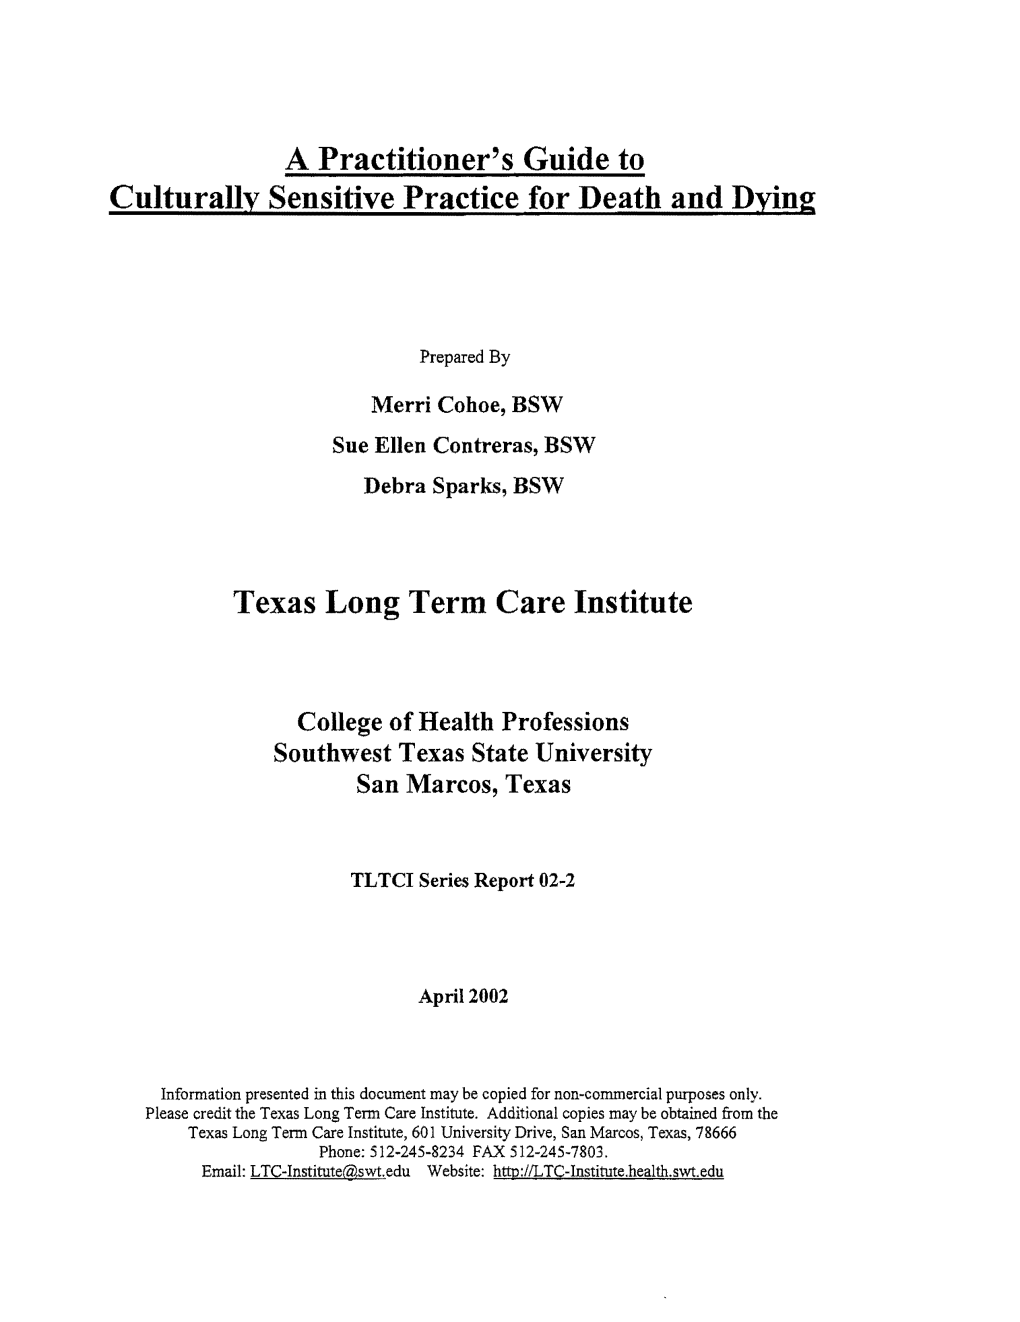 A Practitioner's Guide to Culturally Sensitive Practice for Death and Dying Texas Long Term Care Institute